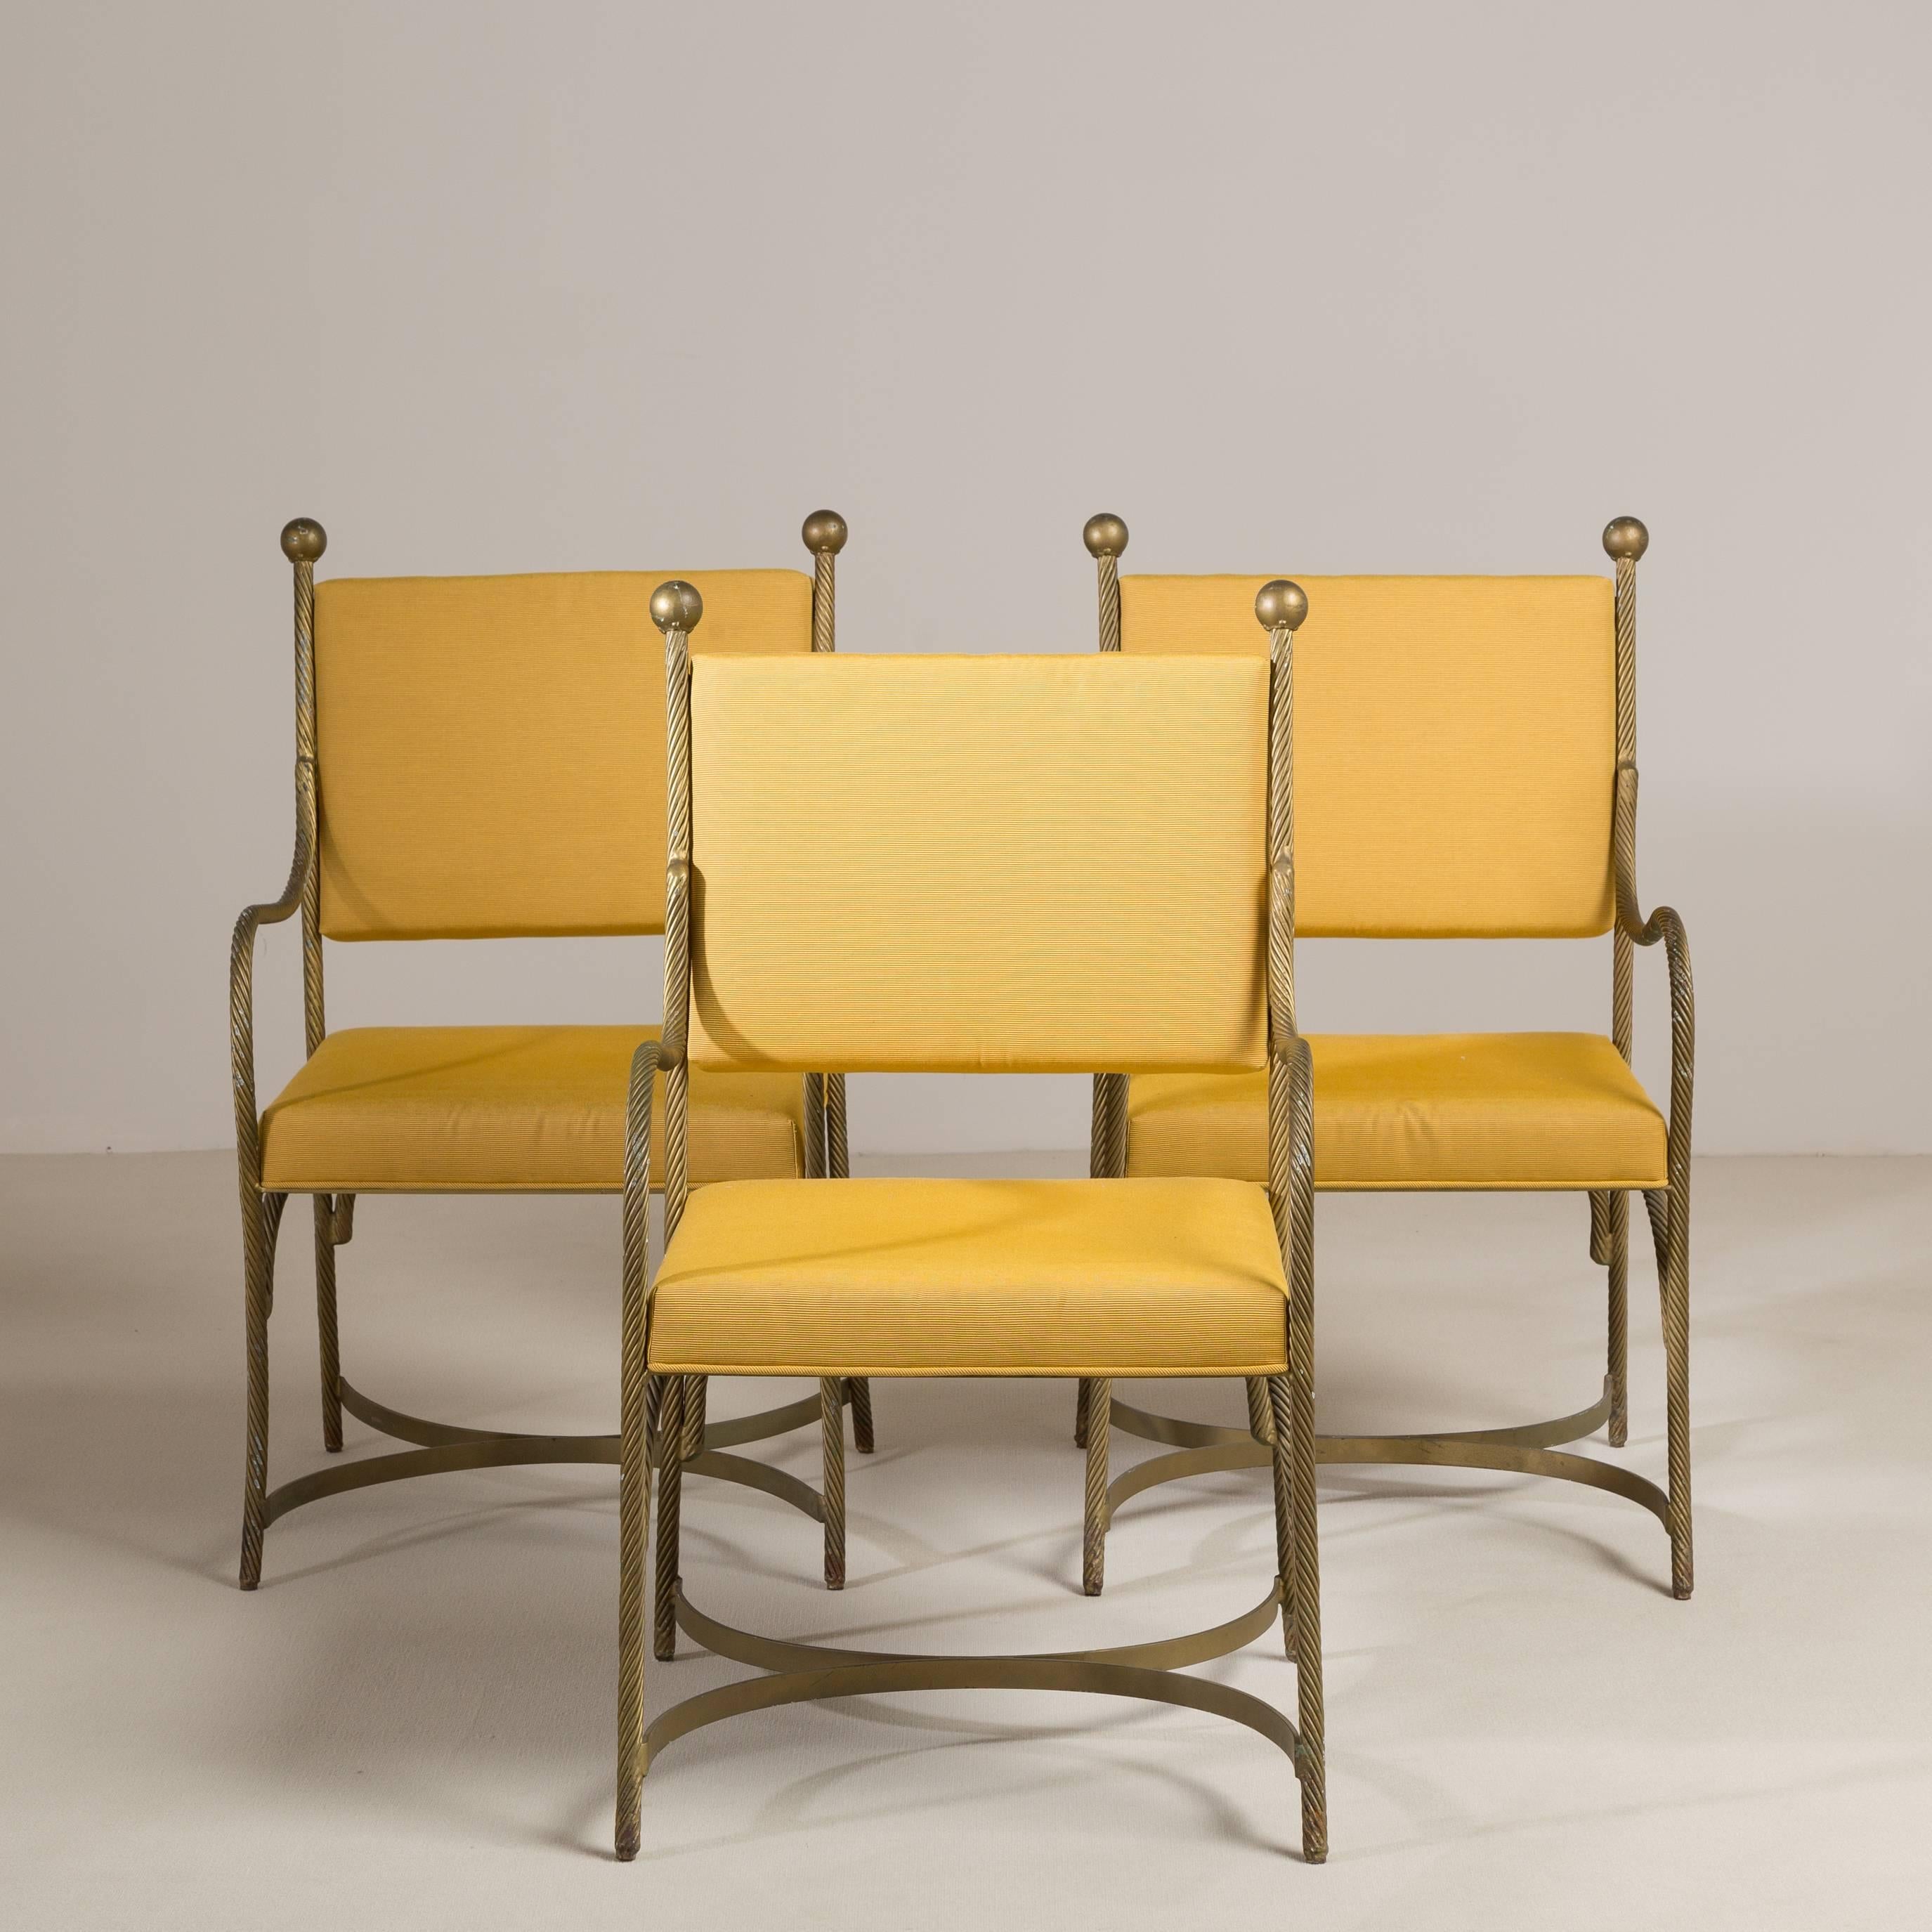 A pair of  heavy simulated rope metal framed upholstered chairs, 1960s reupholstered by Talisman.